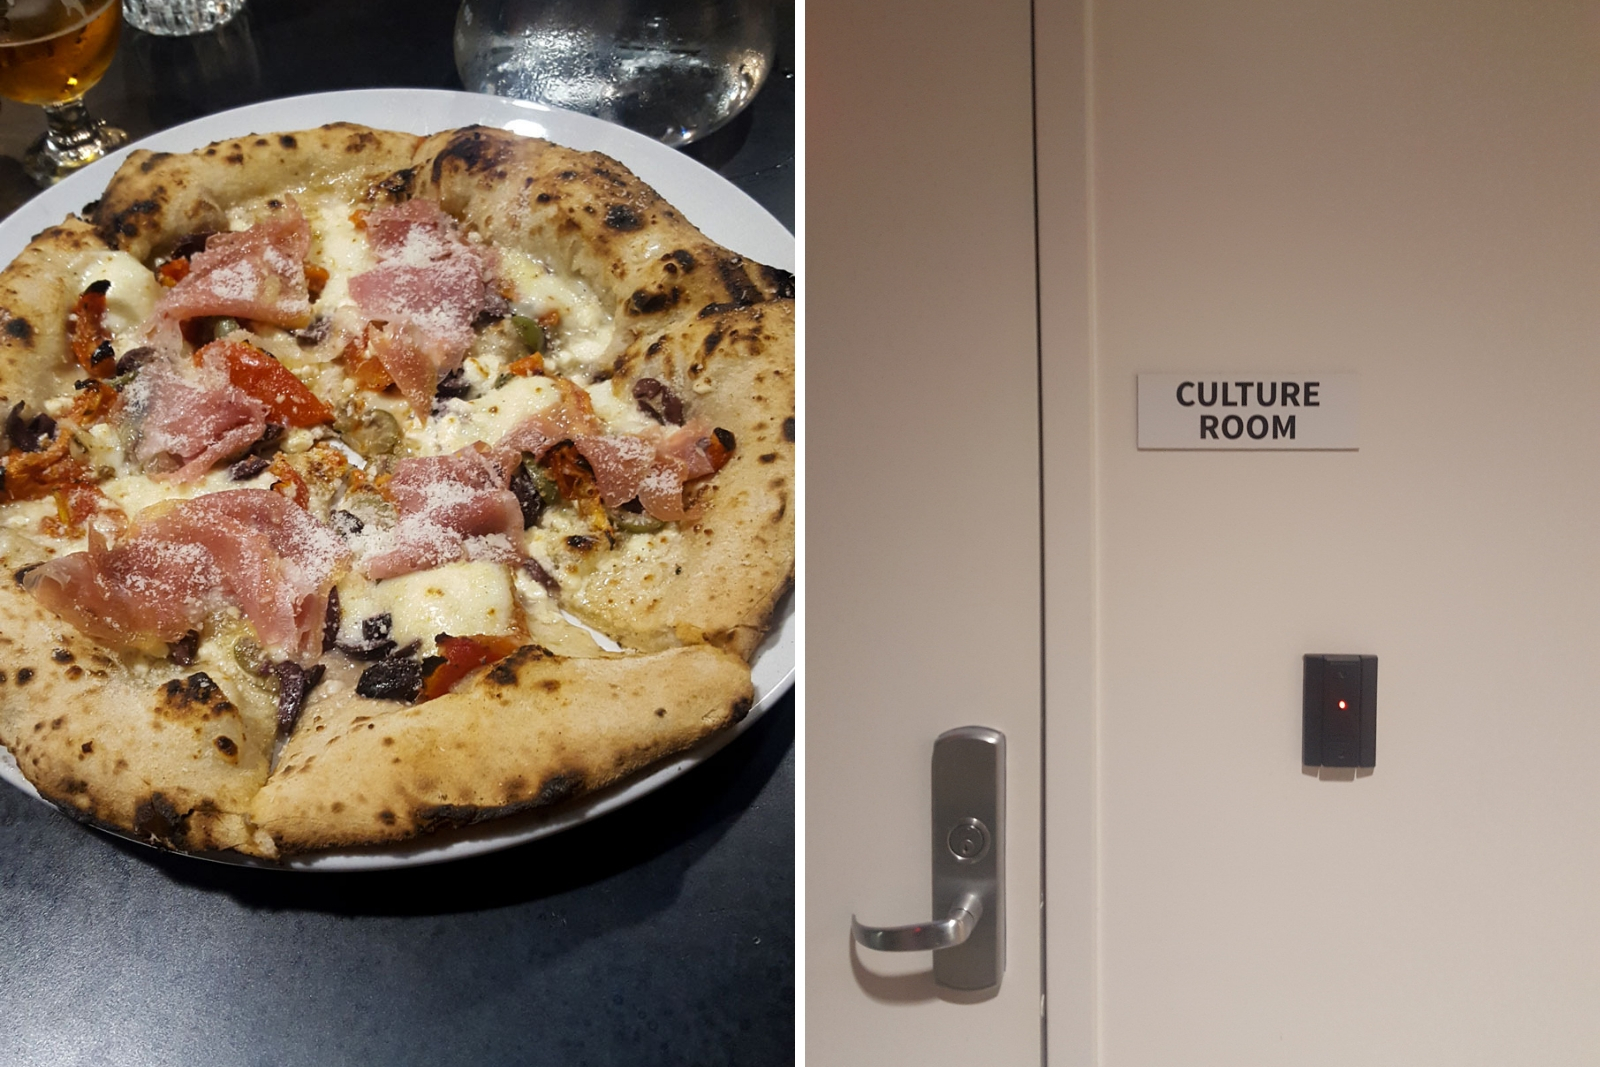 Two images: a pizza, and a door with a sign that reads "culture room"